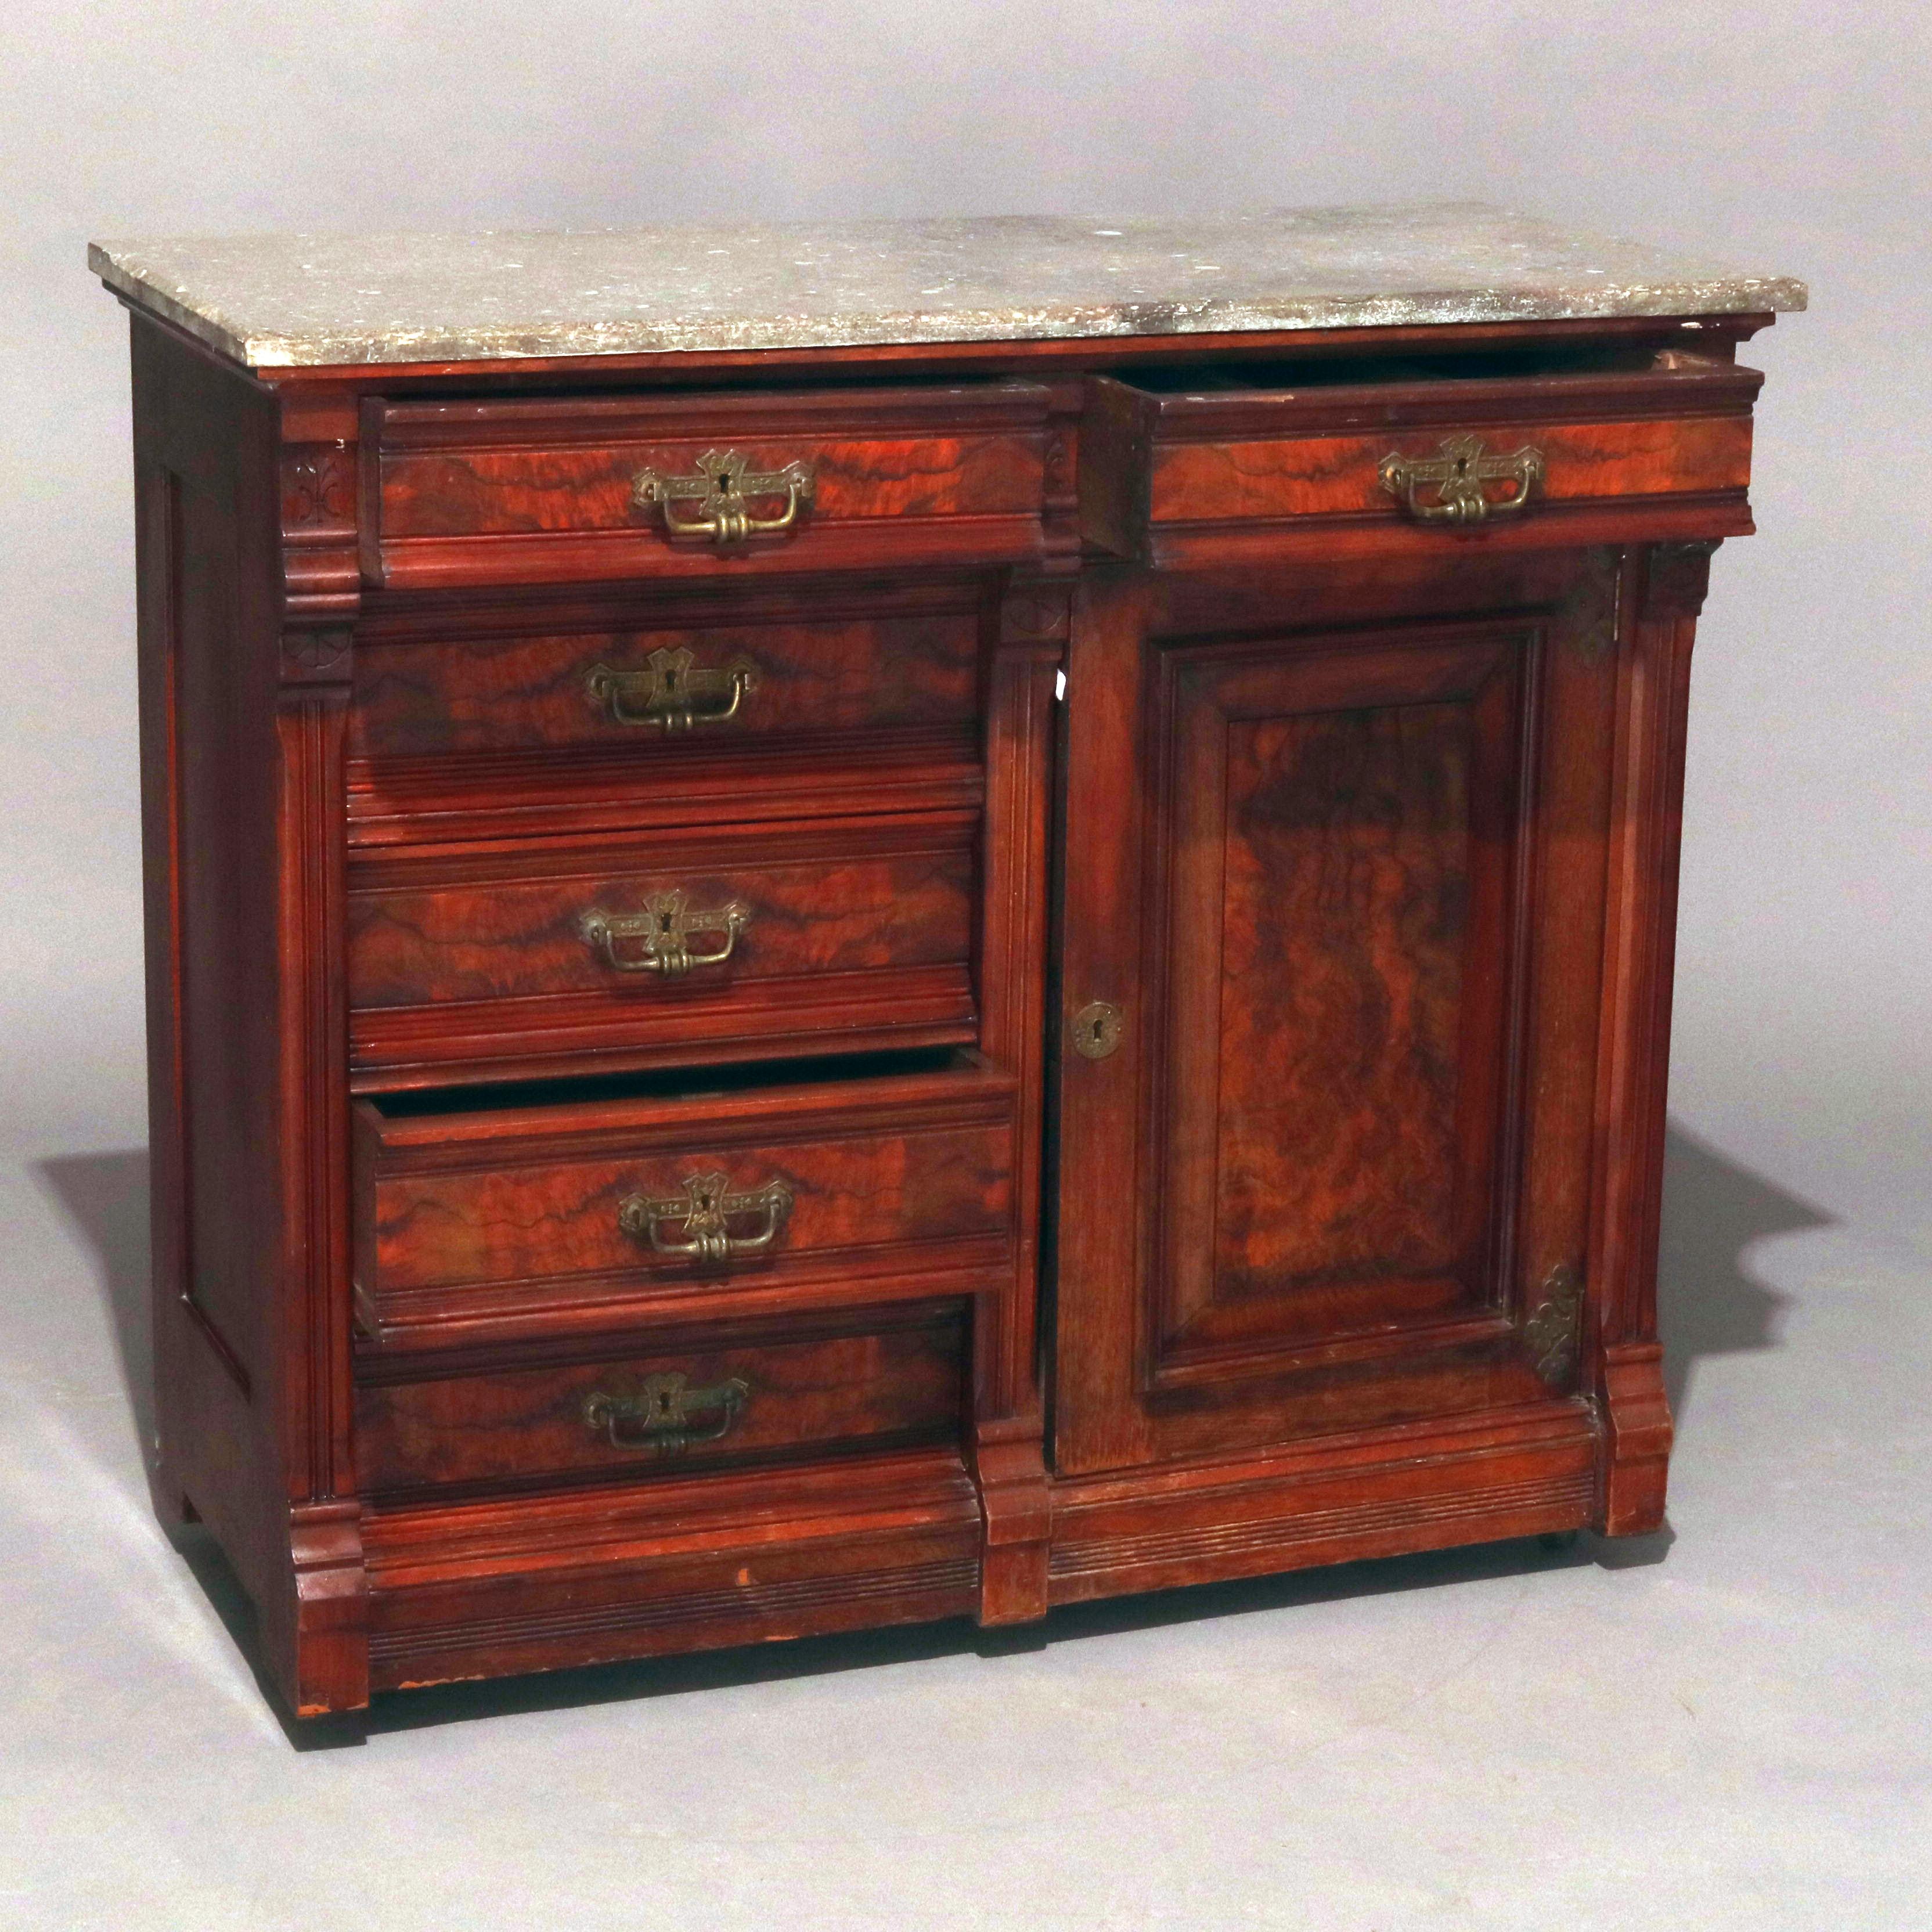 An antique Victorian Eastlake petite server features marble top surmounting mahogany case with drawers and cabinet each having cast bronze hardware, circa 1880.

Measures: 37